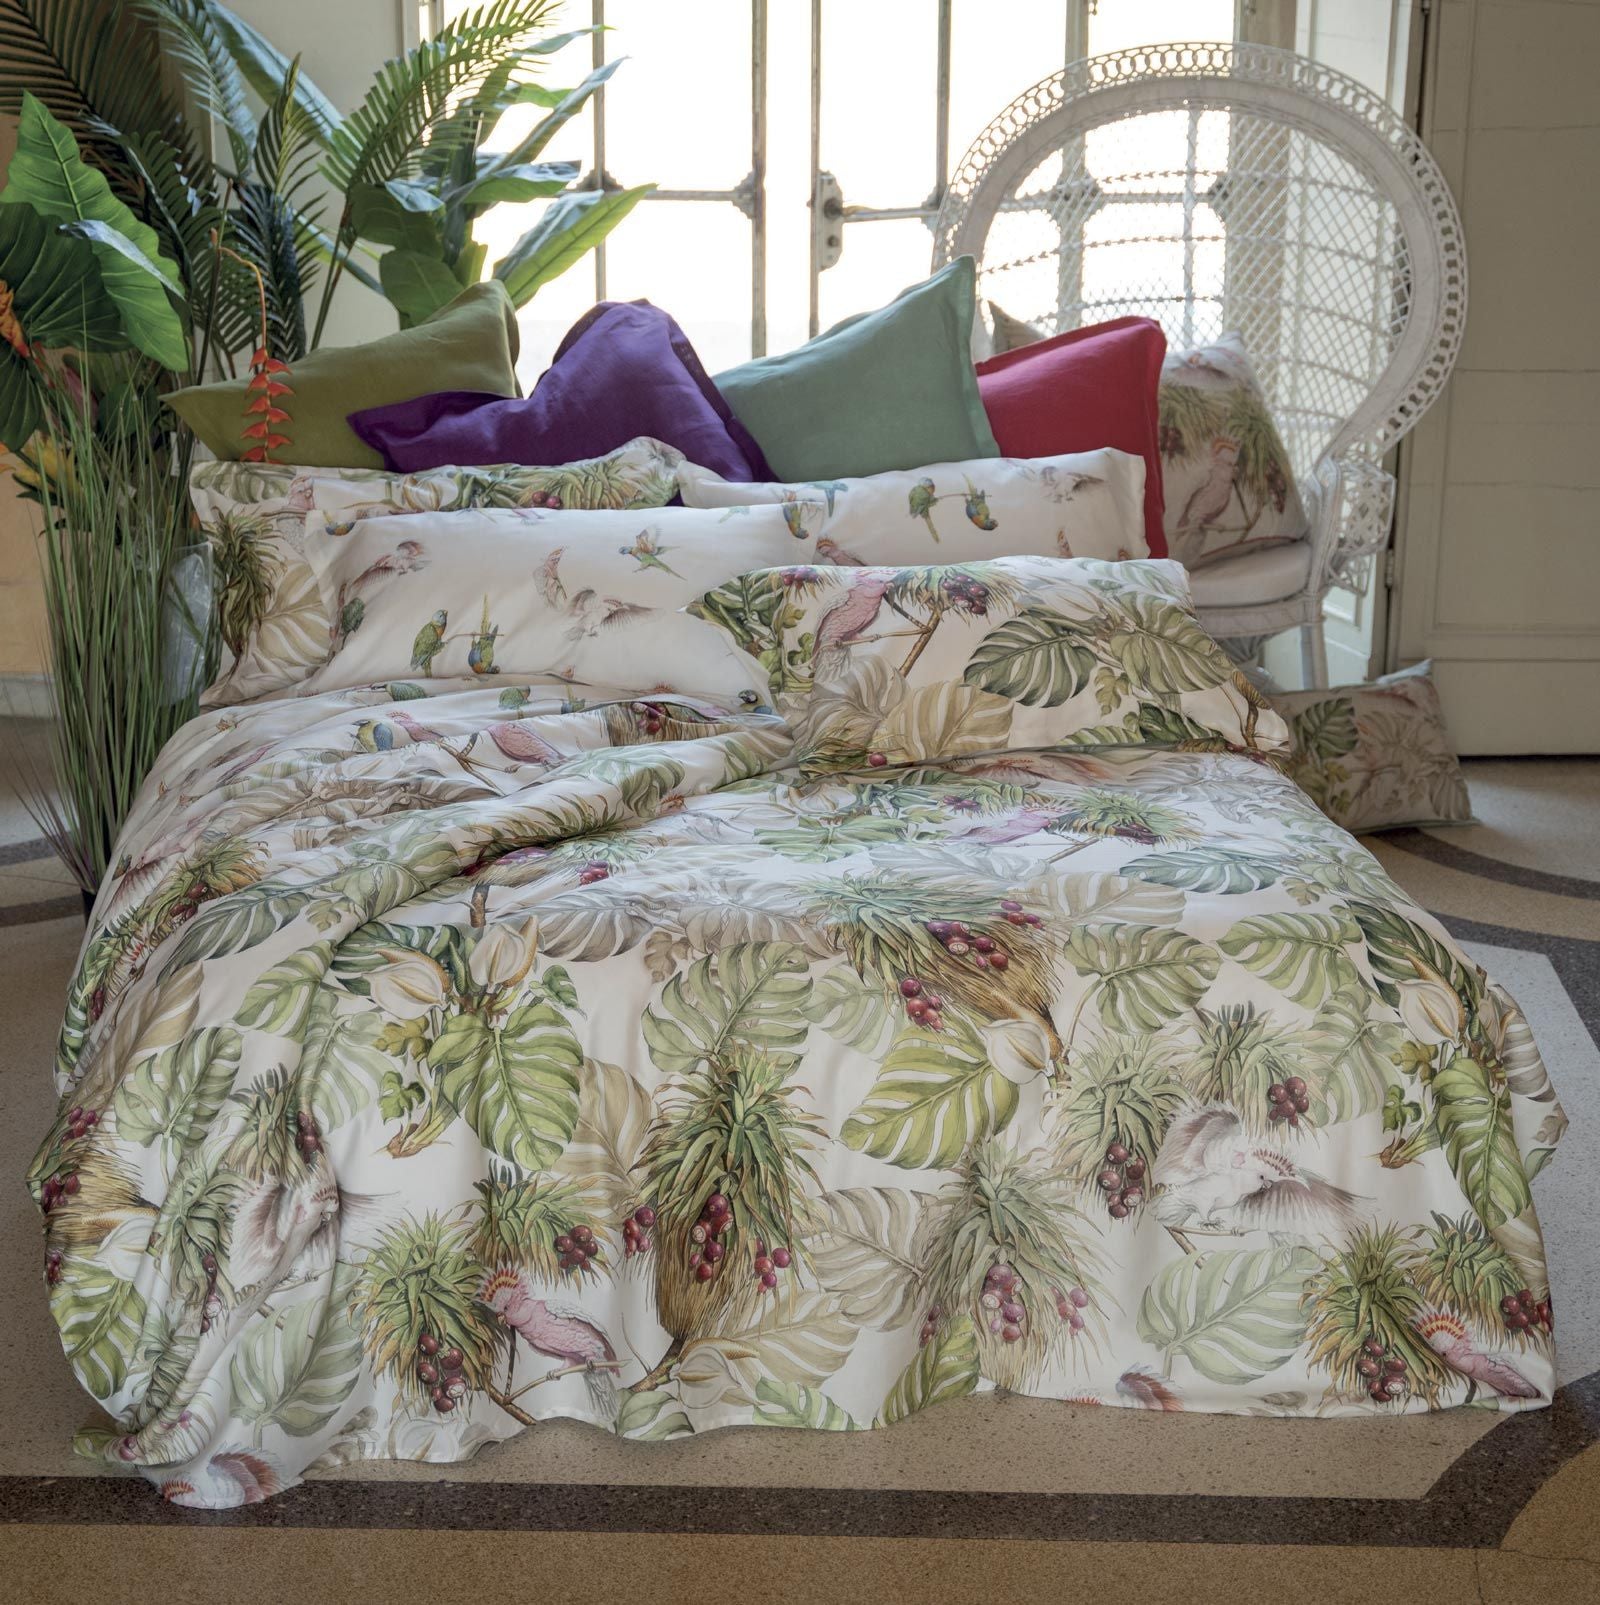 Parrot Bed Linens by Pioneer Linens